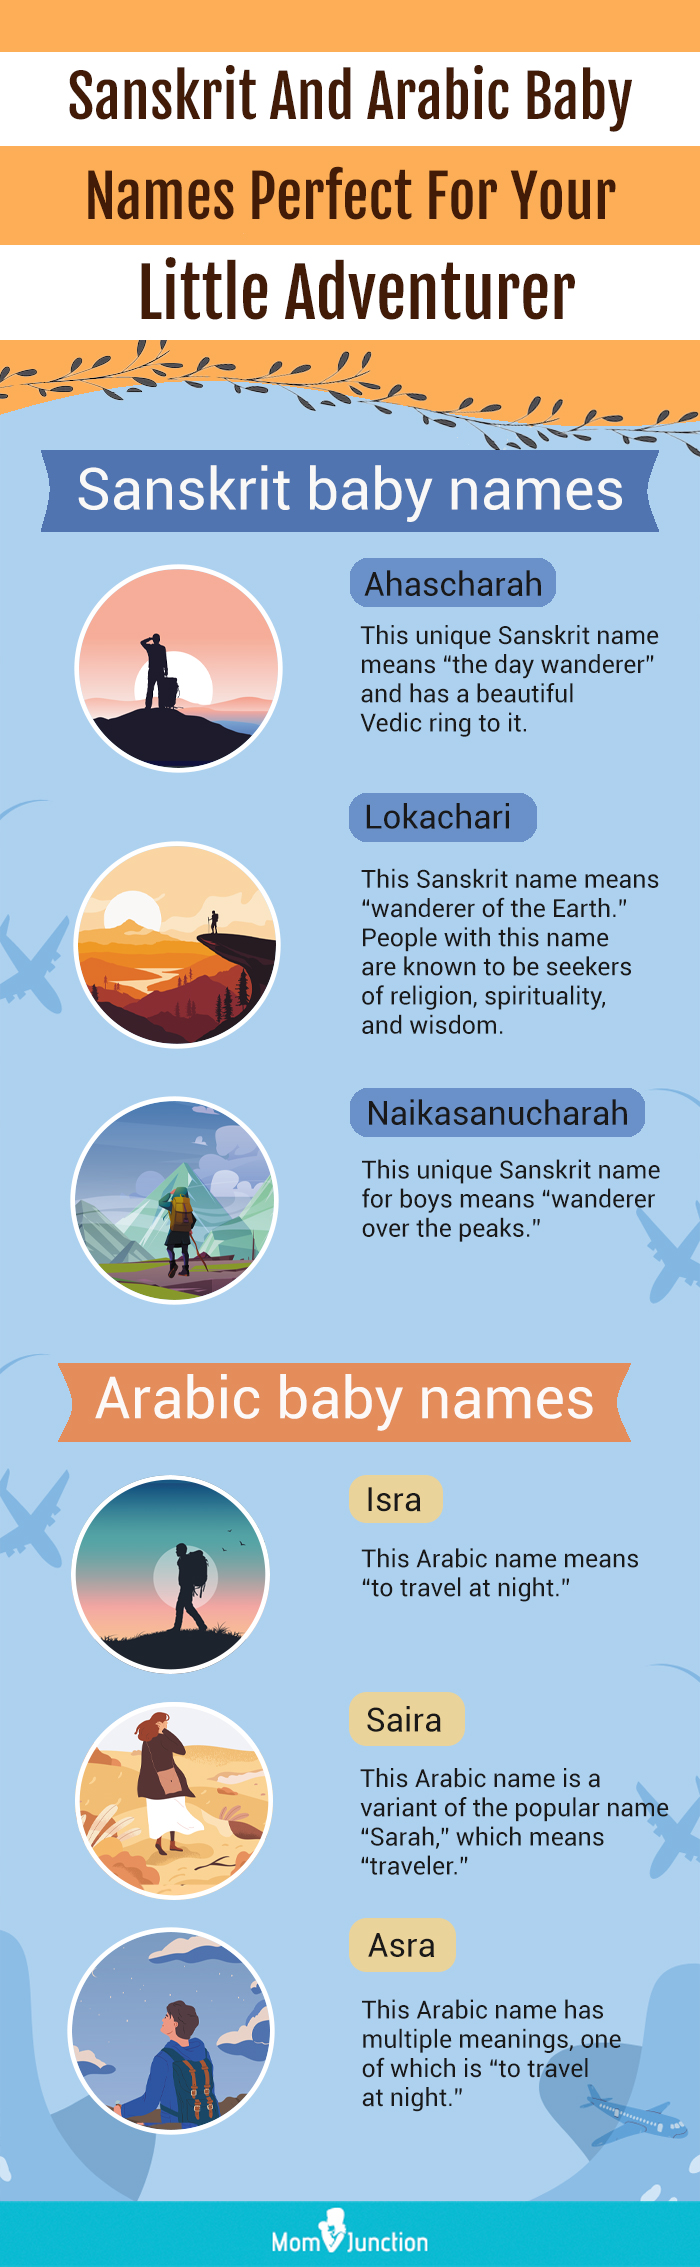 sanskrit and arabic baby names perfect for your little adventurer (infographic)